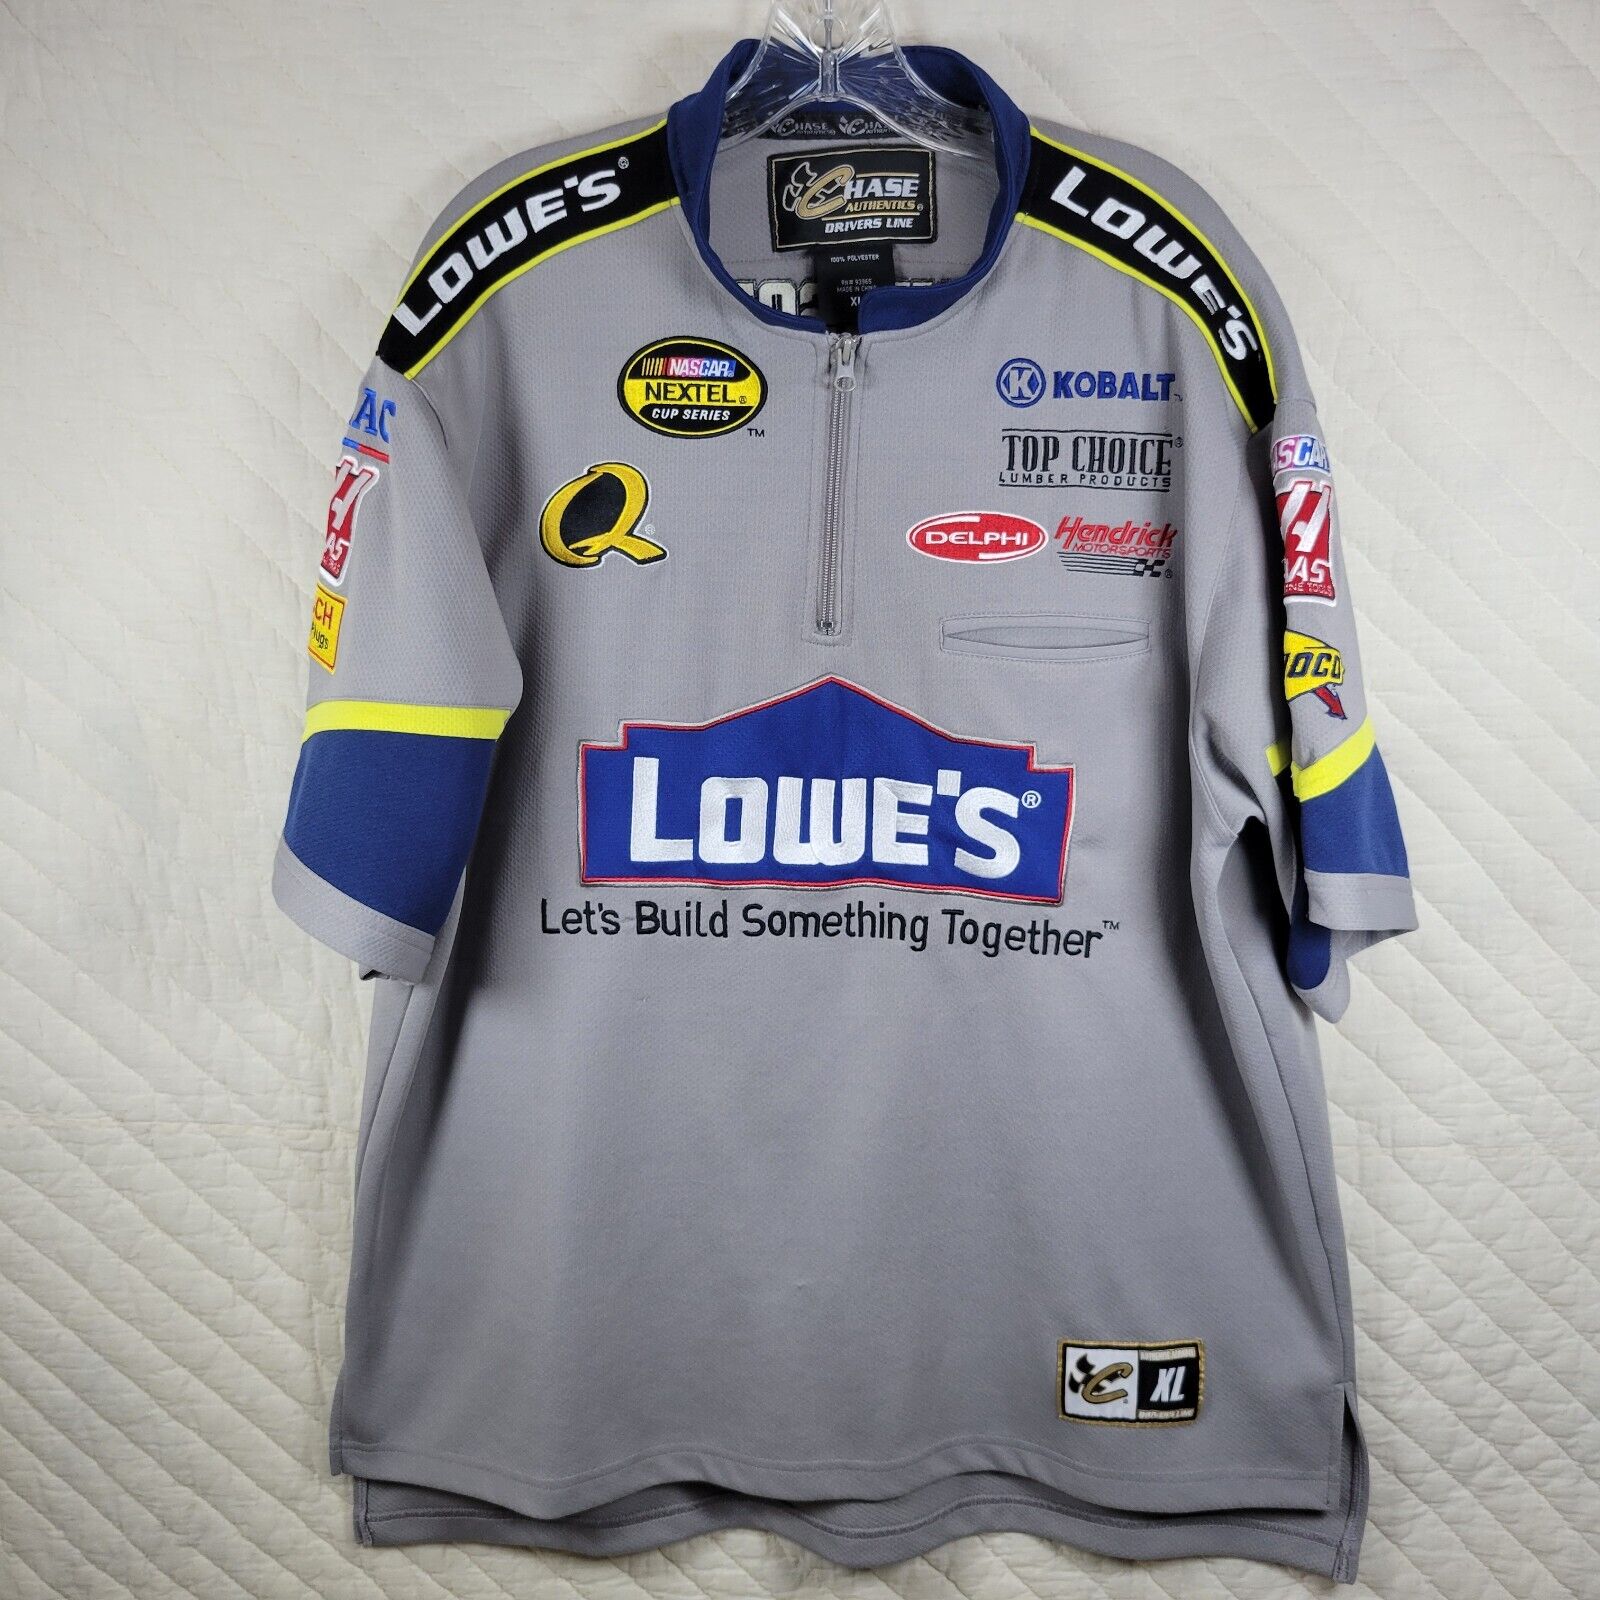 Chase Authentic Nascar Gray Athletic Racing Jersey Shirt Xl Jimmie Johnson #48